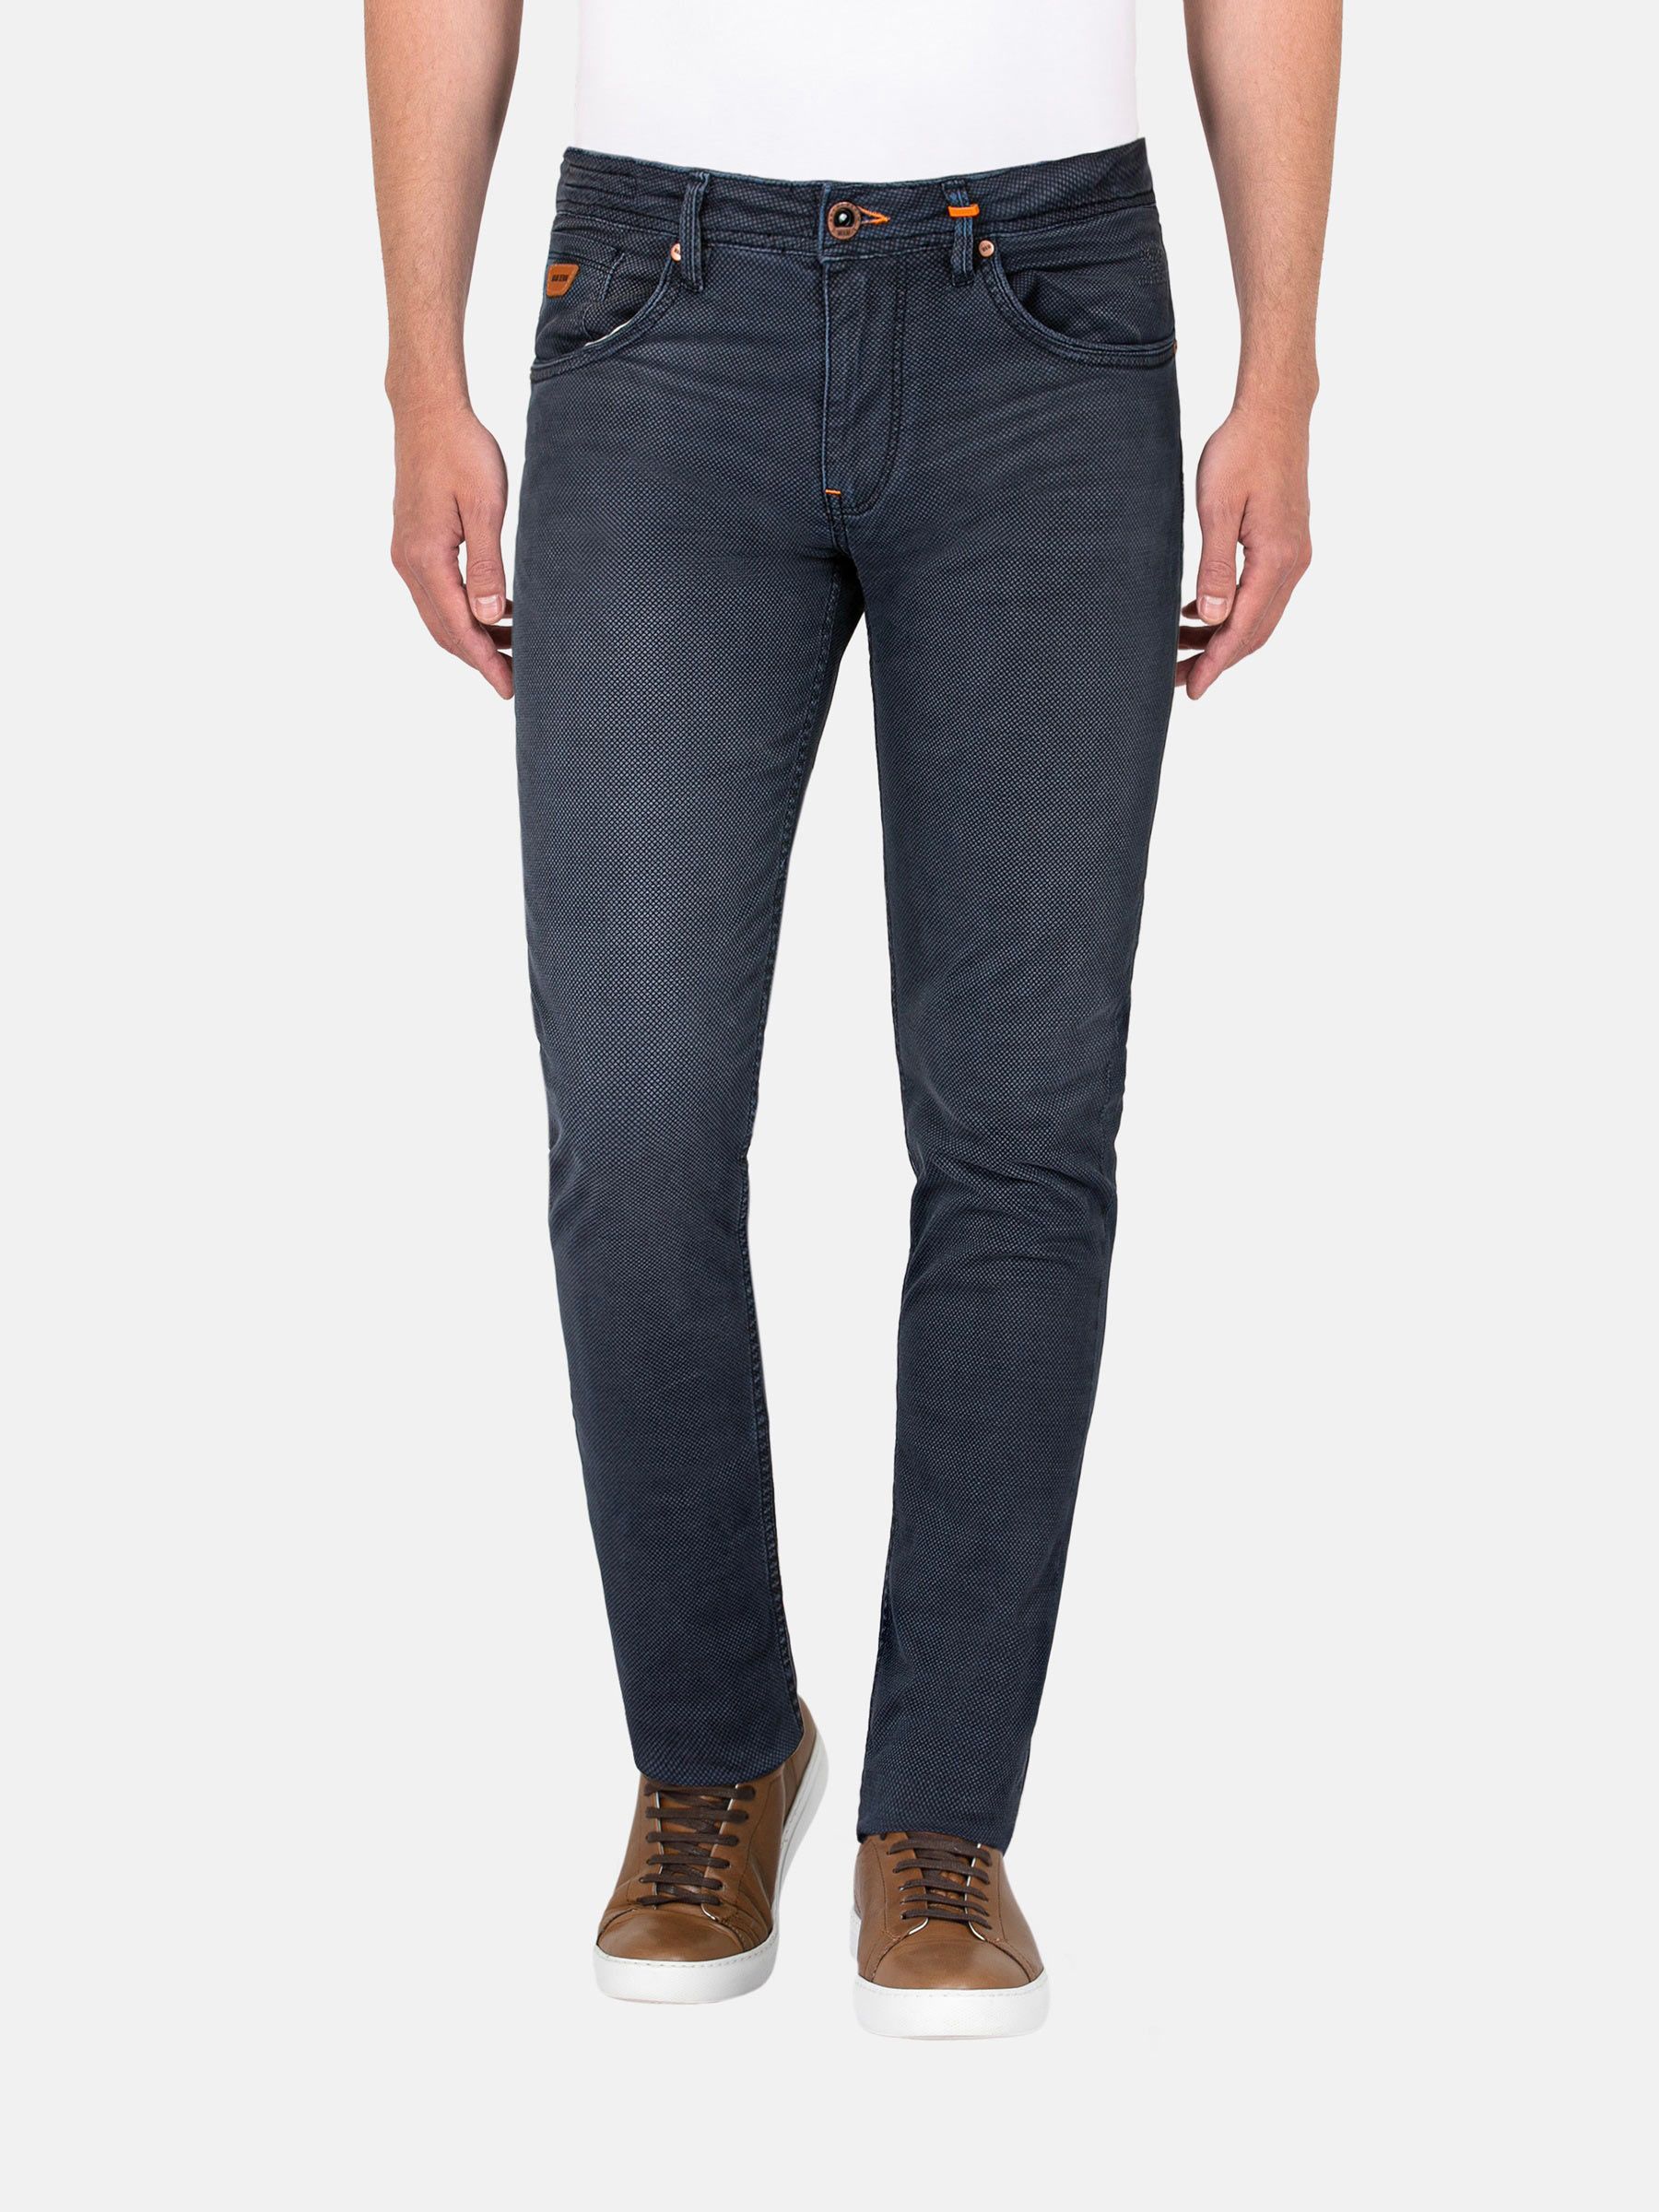 Buy Blue Jeans for Men by MAX Online | Ajio.com